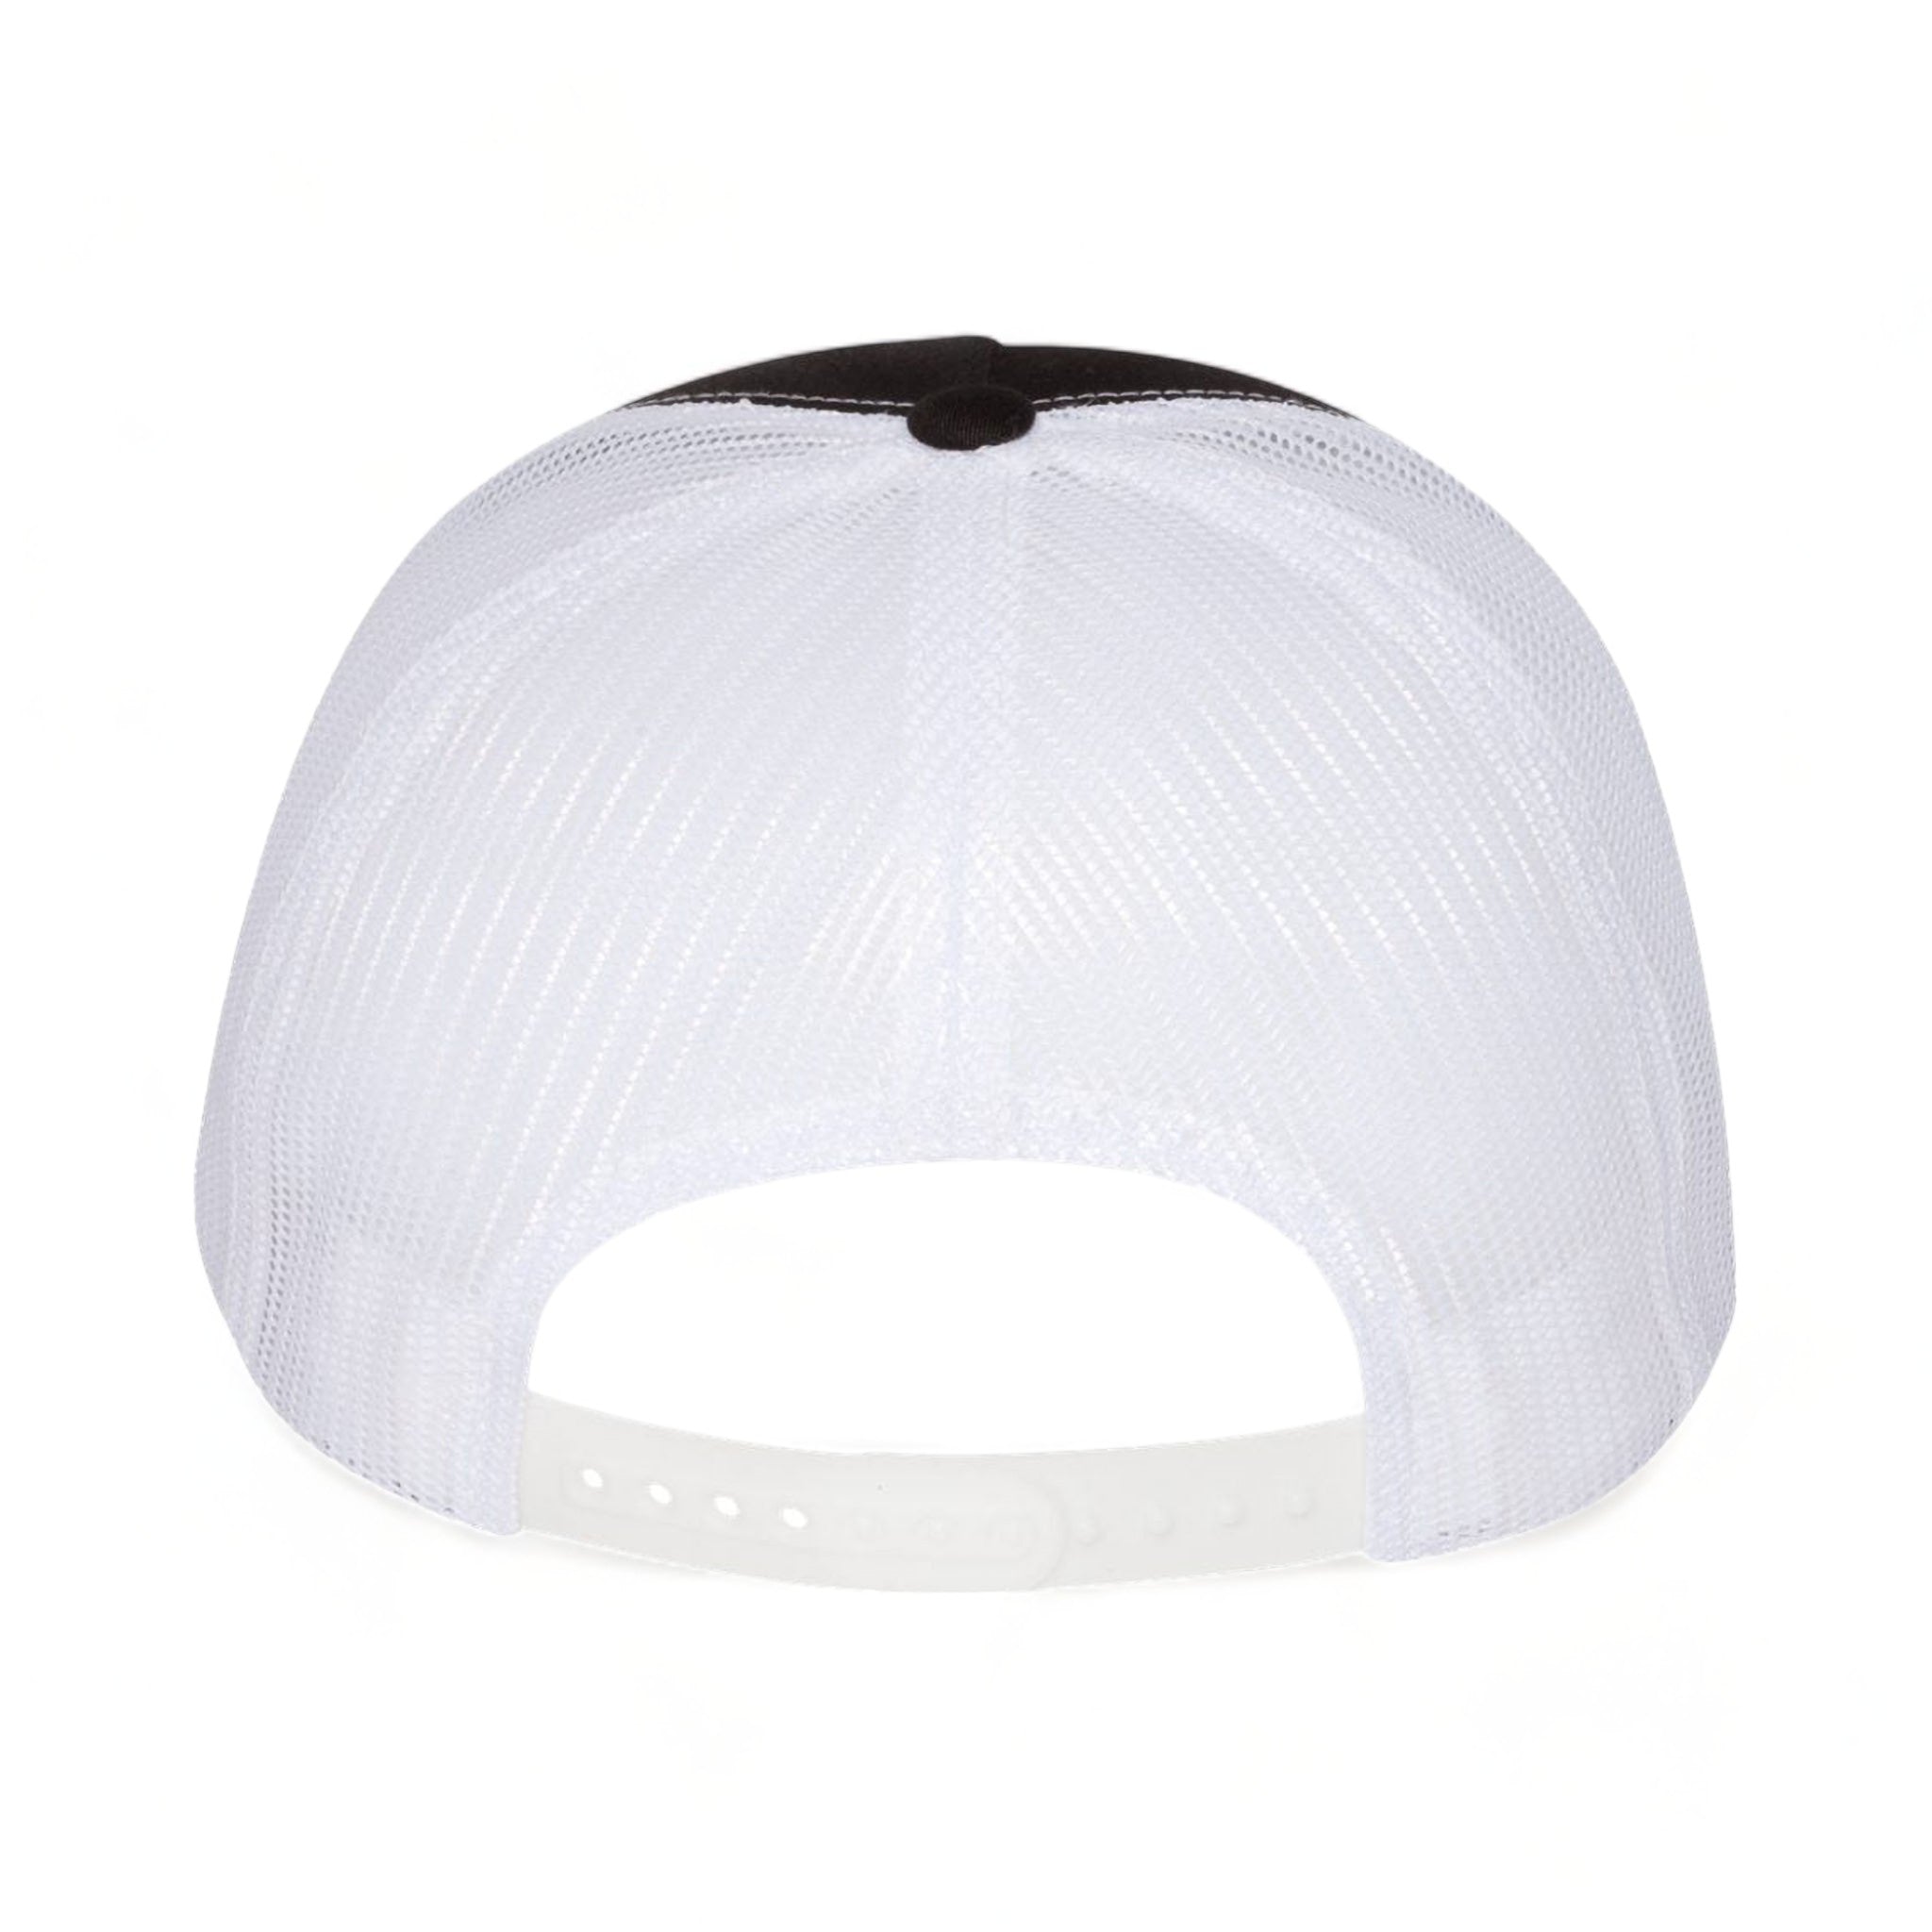 Back view of YP Classics 6006 custom hat in black and white